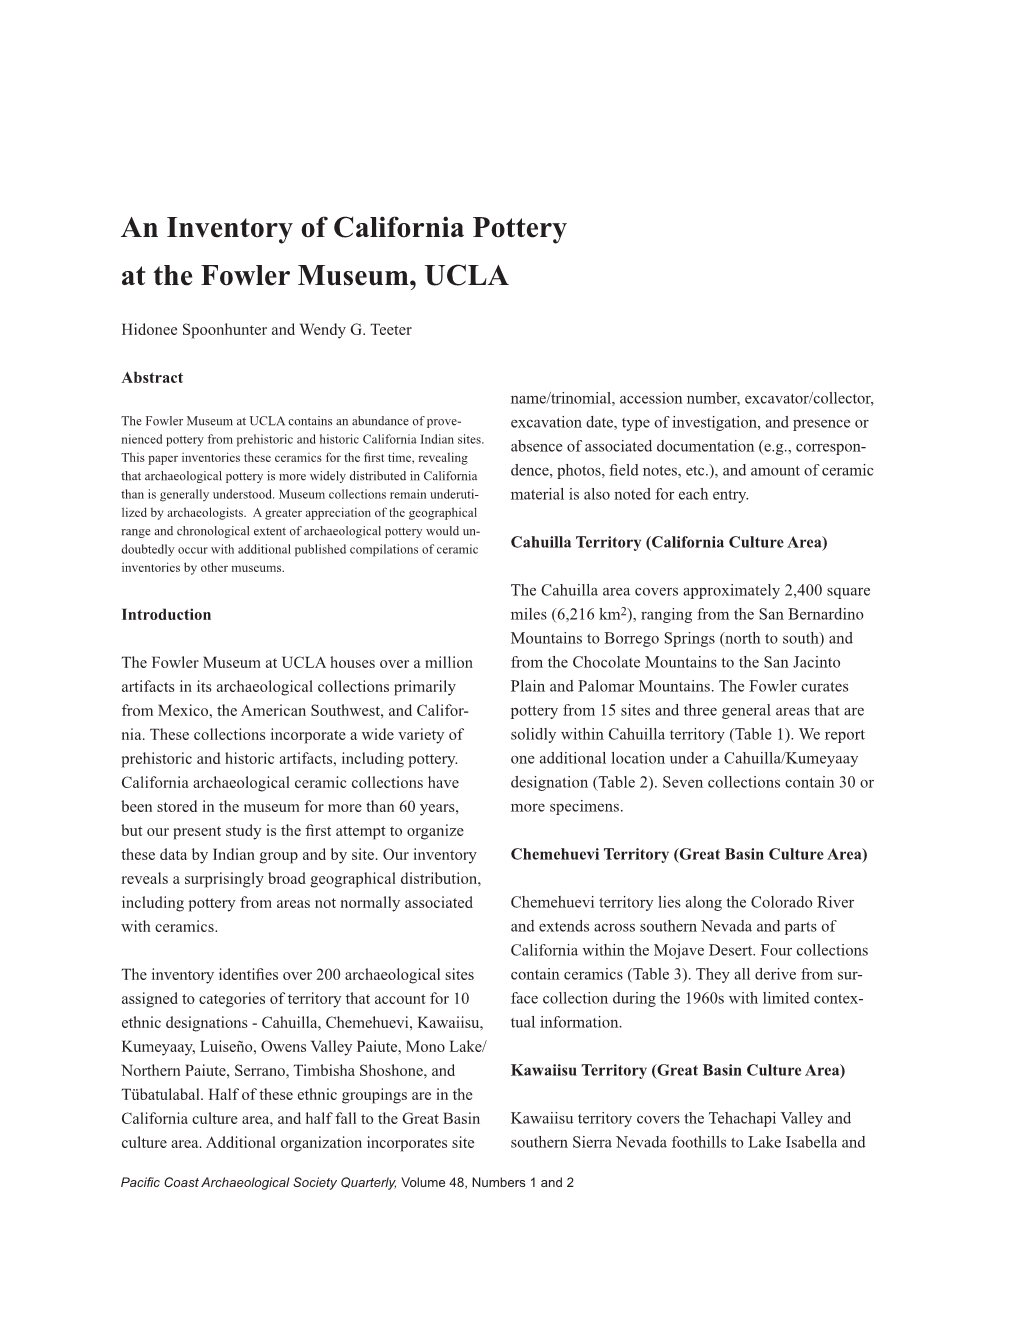 An Inventory of California Pottery at the Fowler Museum, UCLA